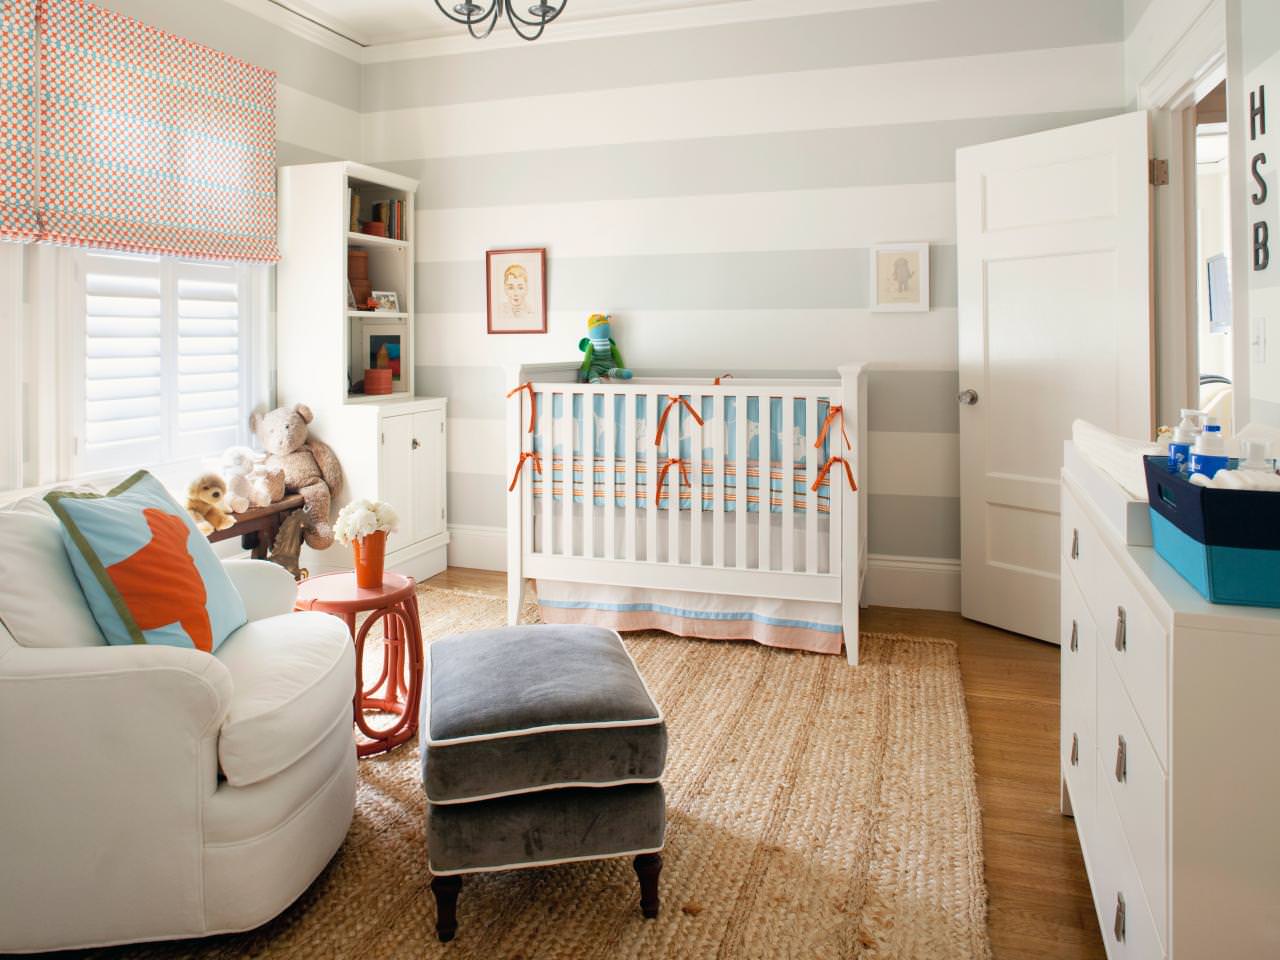 Baby Room Ideas on a Budget